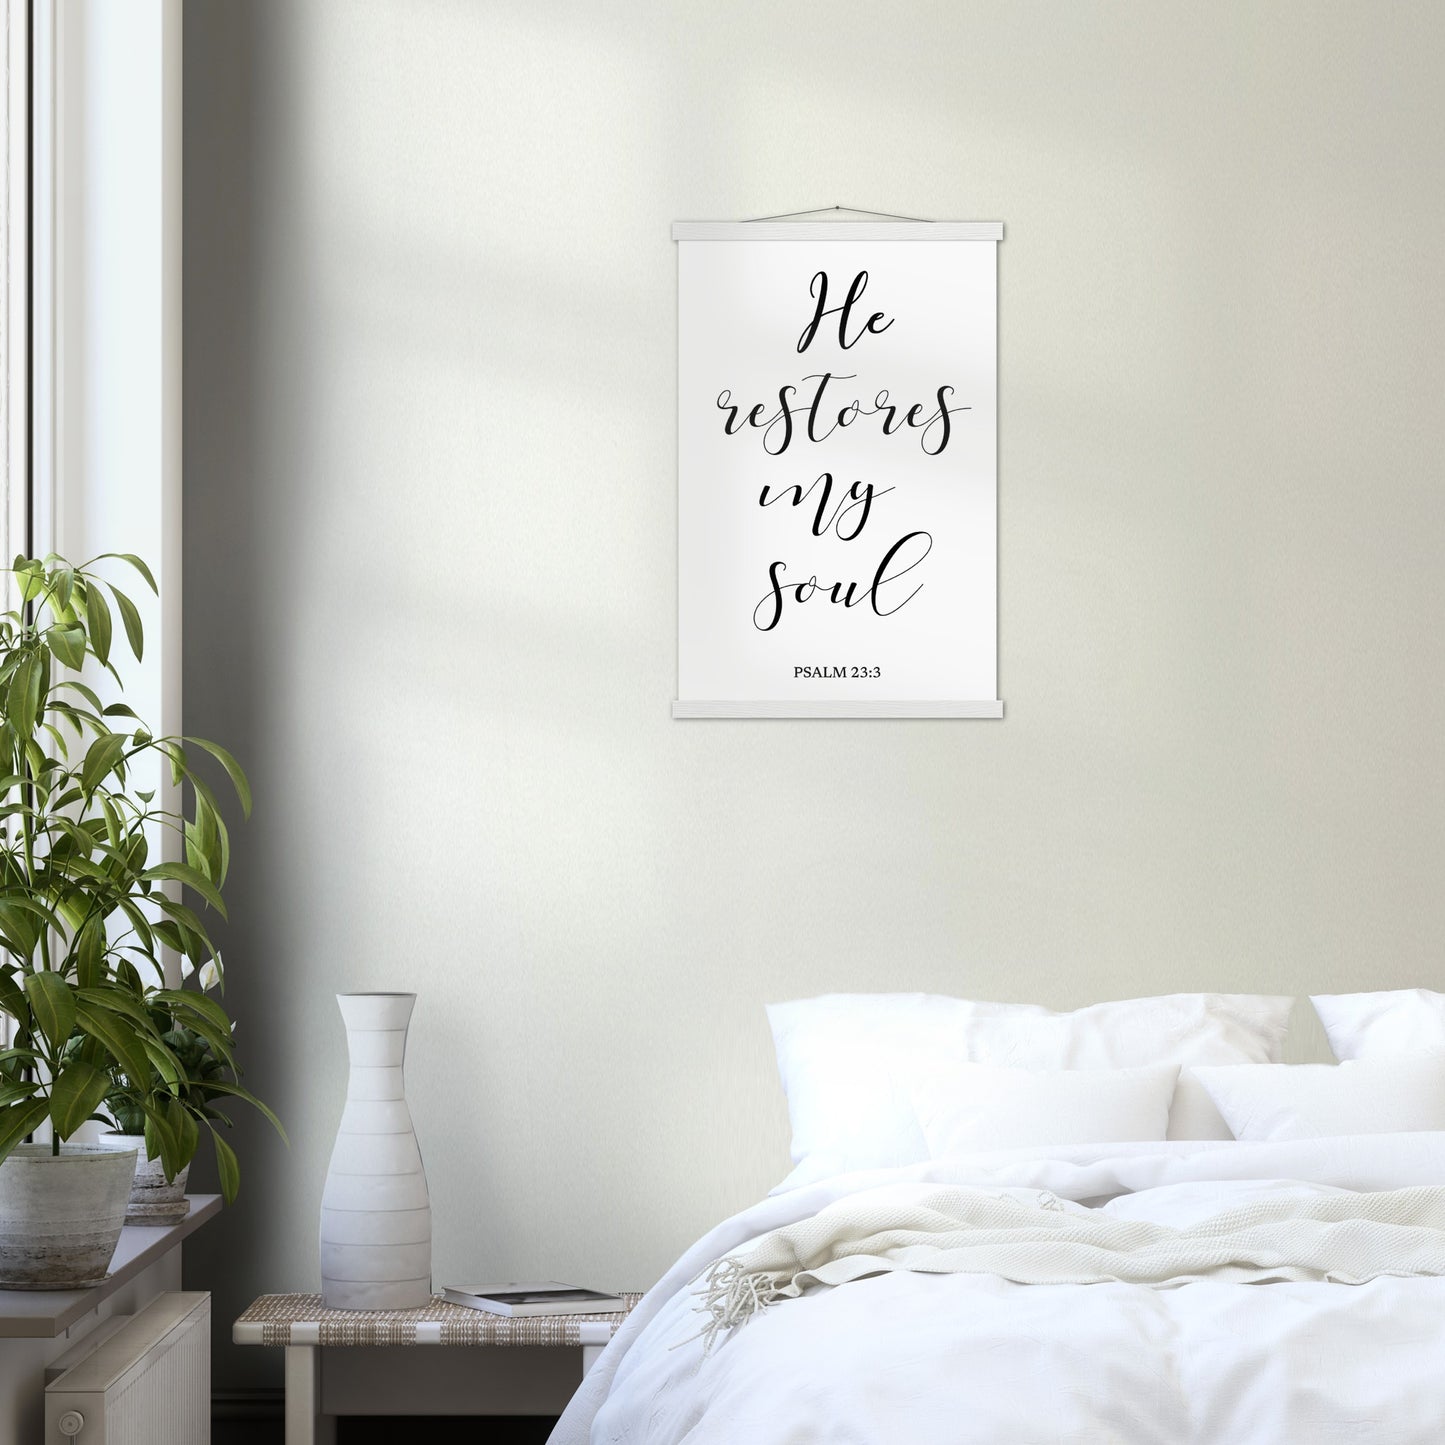 Home Decor | He Restores My Soul | Christian Wall Art | Premium Poster with Banner Wood